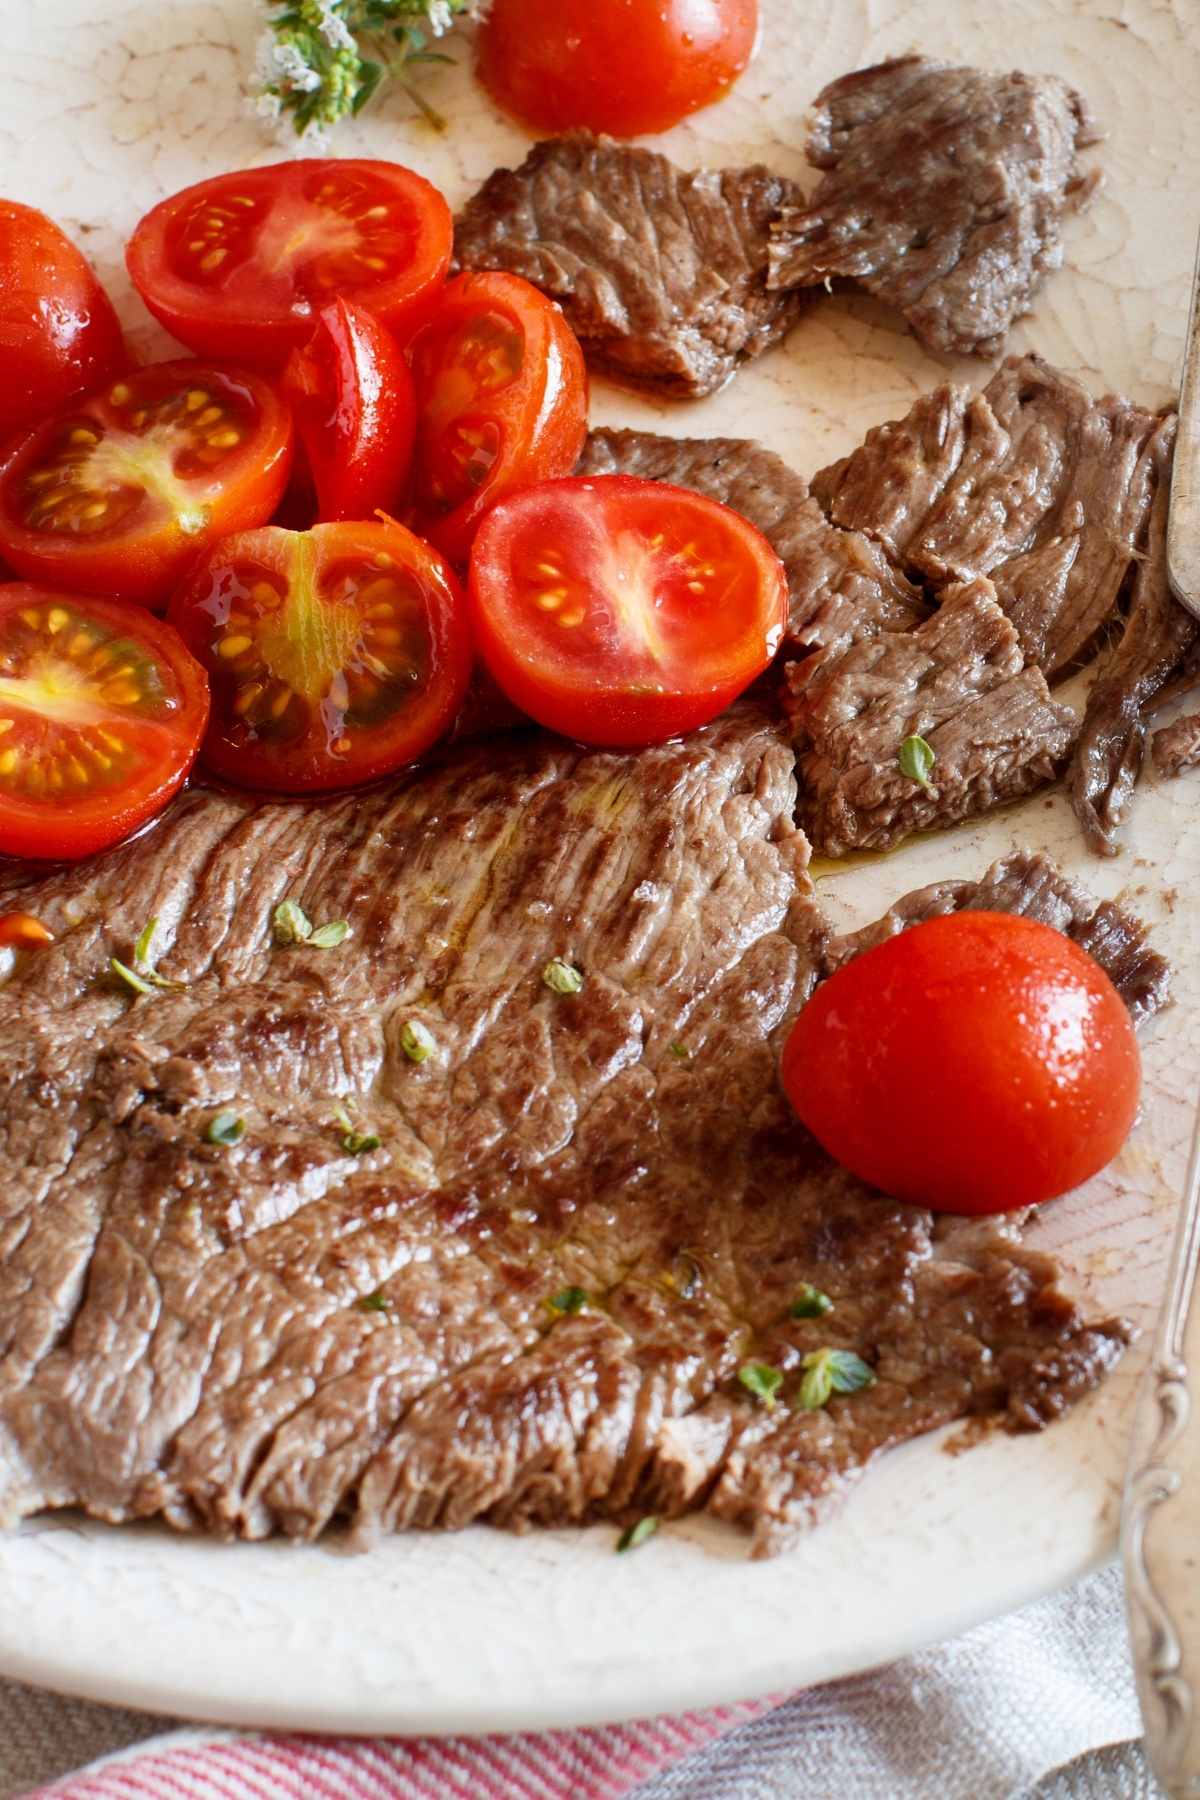 Sizzle steaks are thinly sliced cuts or shaved slices of beef that are flavorful and quick to cook, making them our go-to meal for a simple weeknight dinner. Serve fresh from the pan with a quick side salad or fluffy mashed potatoes for a complete meal in under 20 minutes!